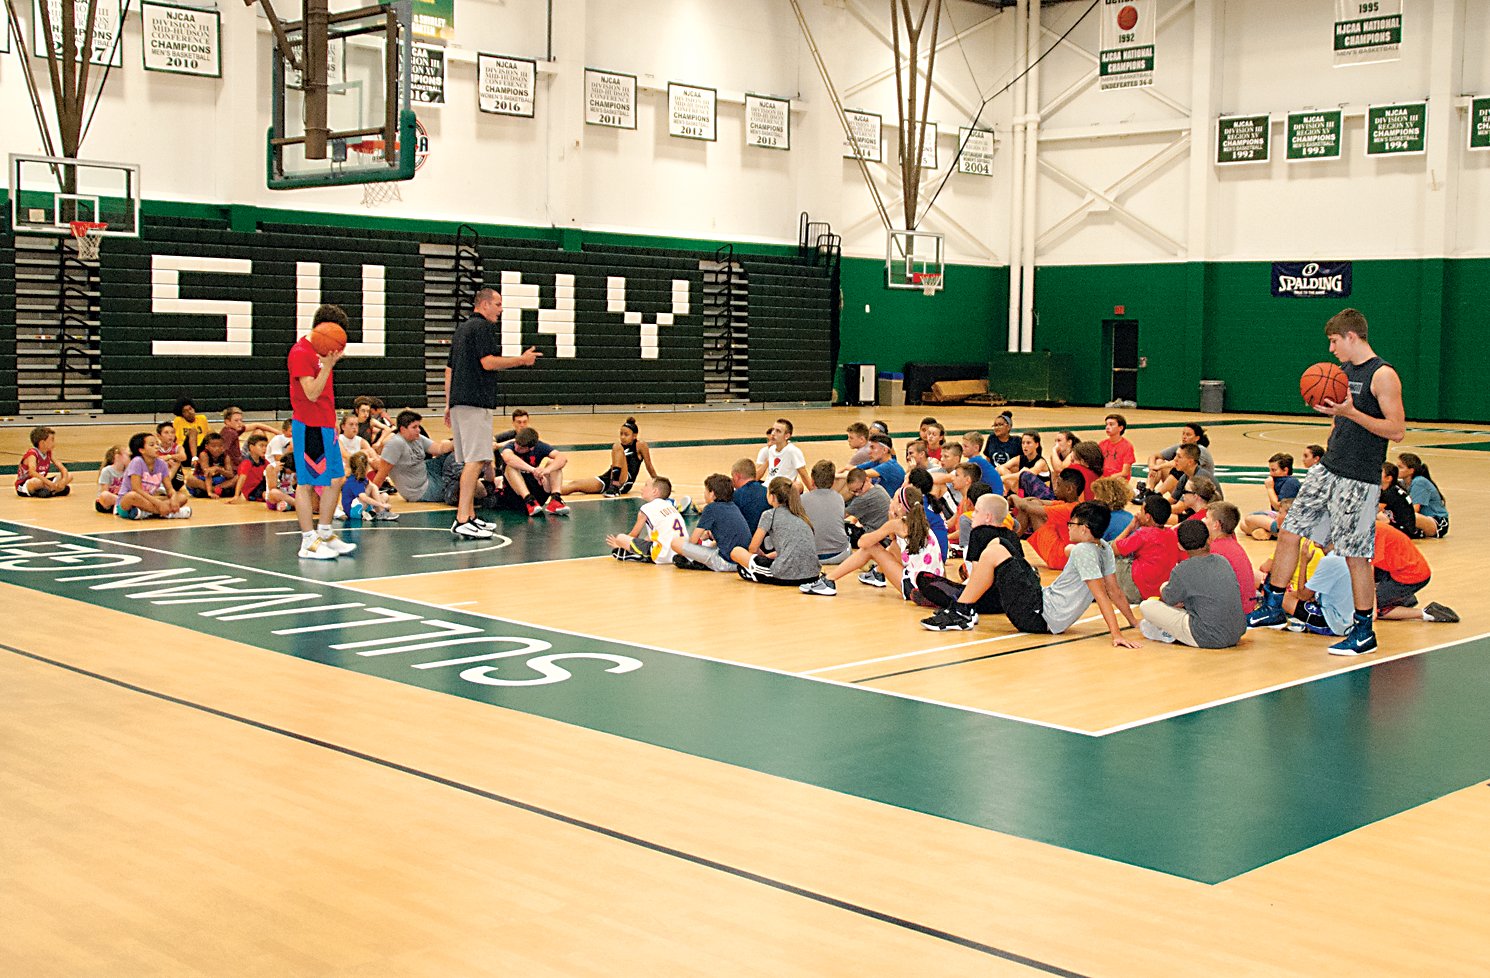 The SUNY Sullivan Basketball camp has been around for more than 20 years and offers young athletes the opportunity to learn and develop their skills.